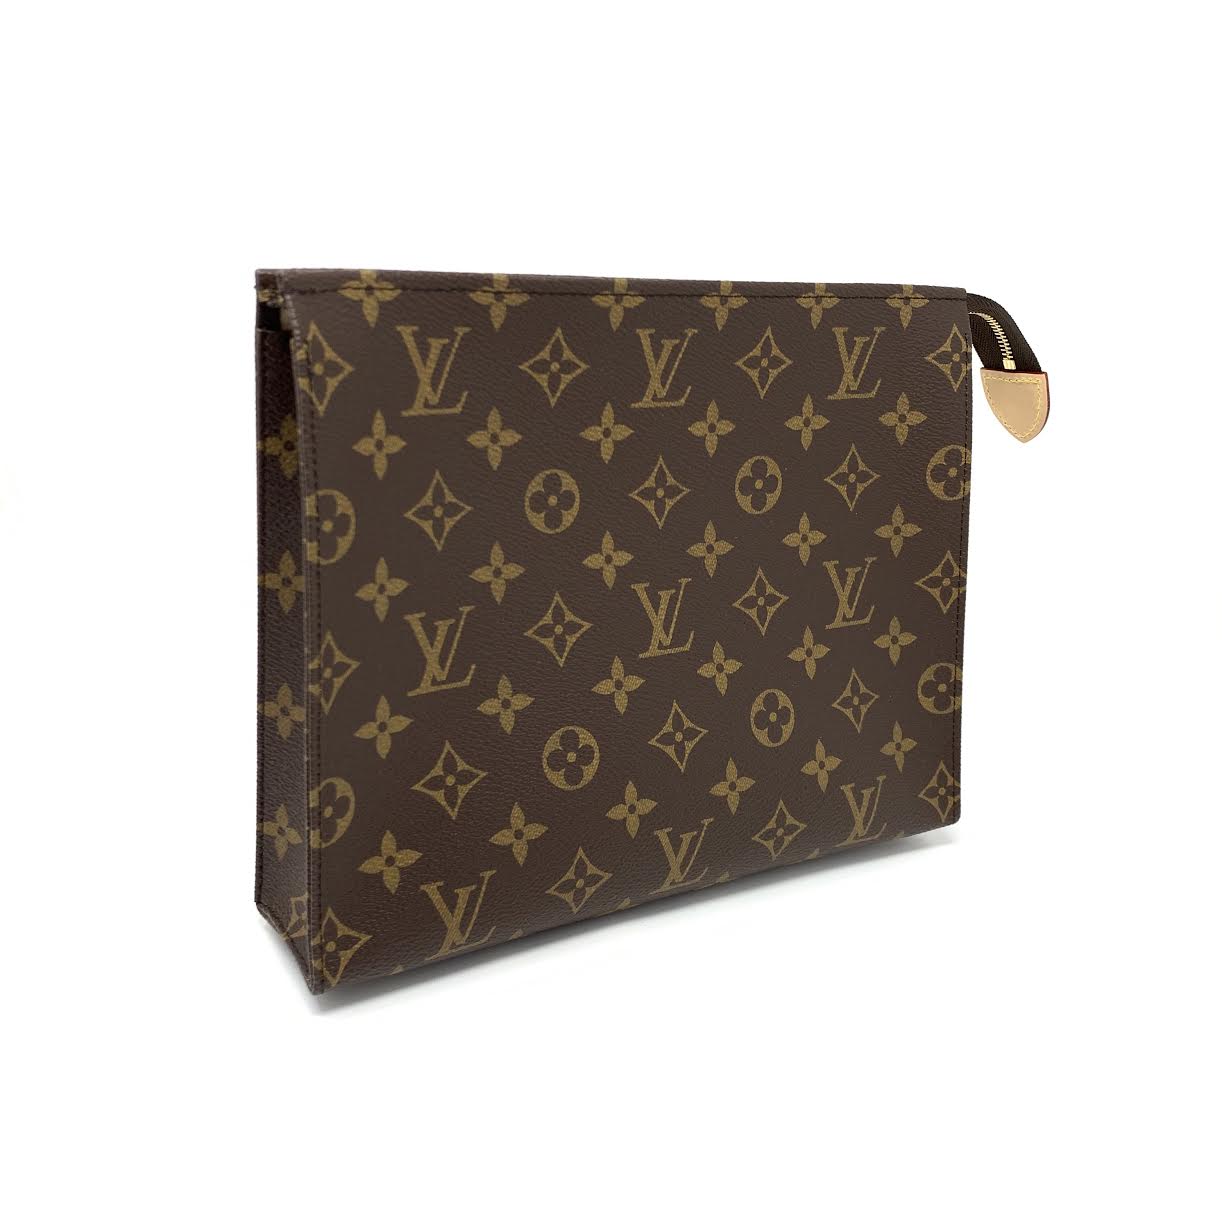 Louis Vuitton Toiletry 26 Zip Pouch in Monogram with Conversion